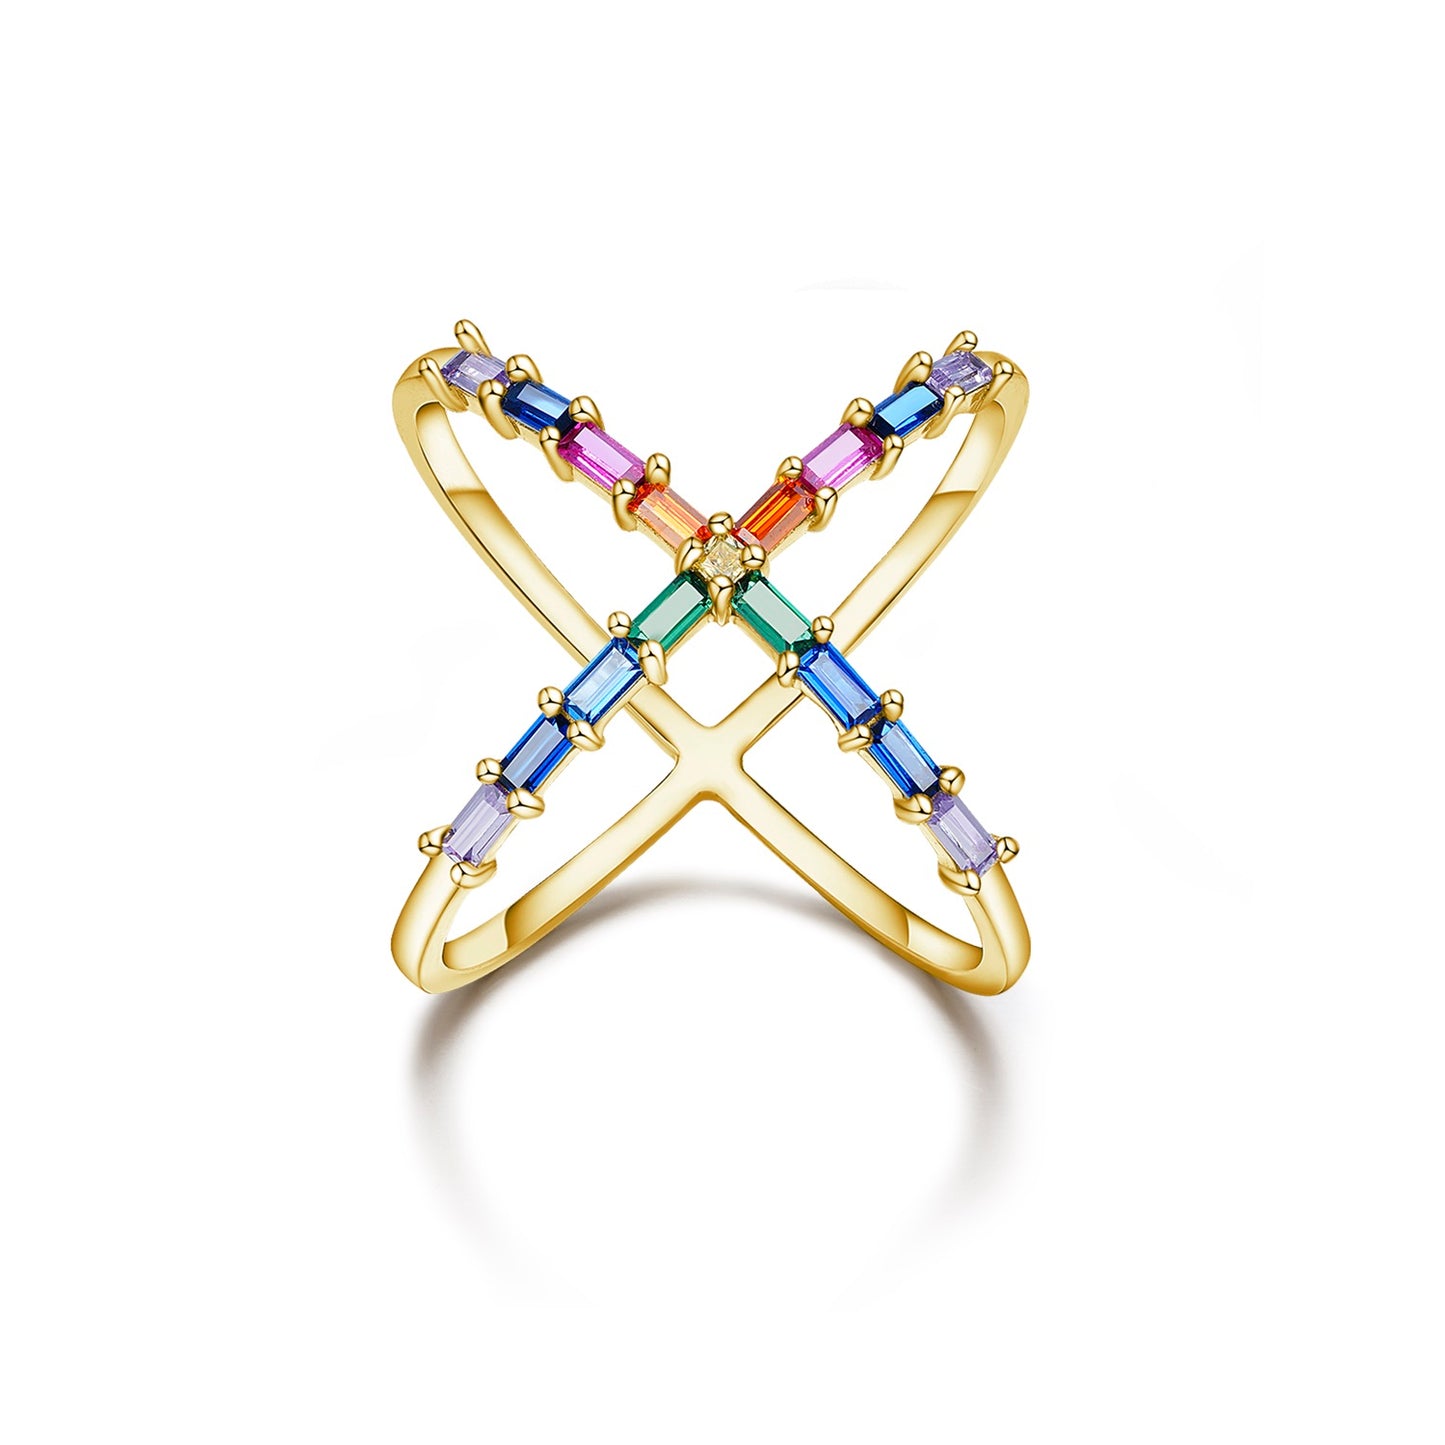 Rainbow - Sterling Silver Ring